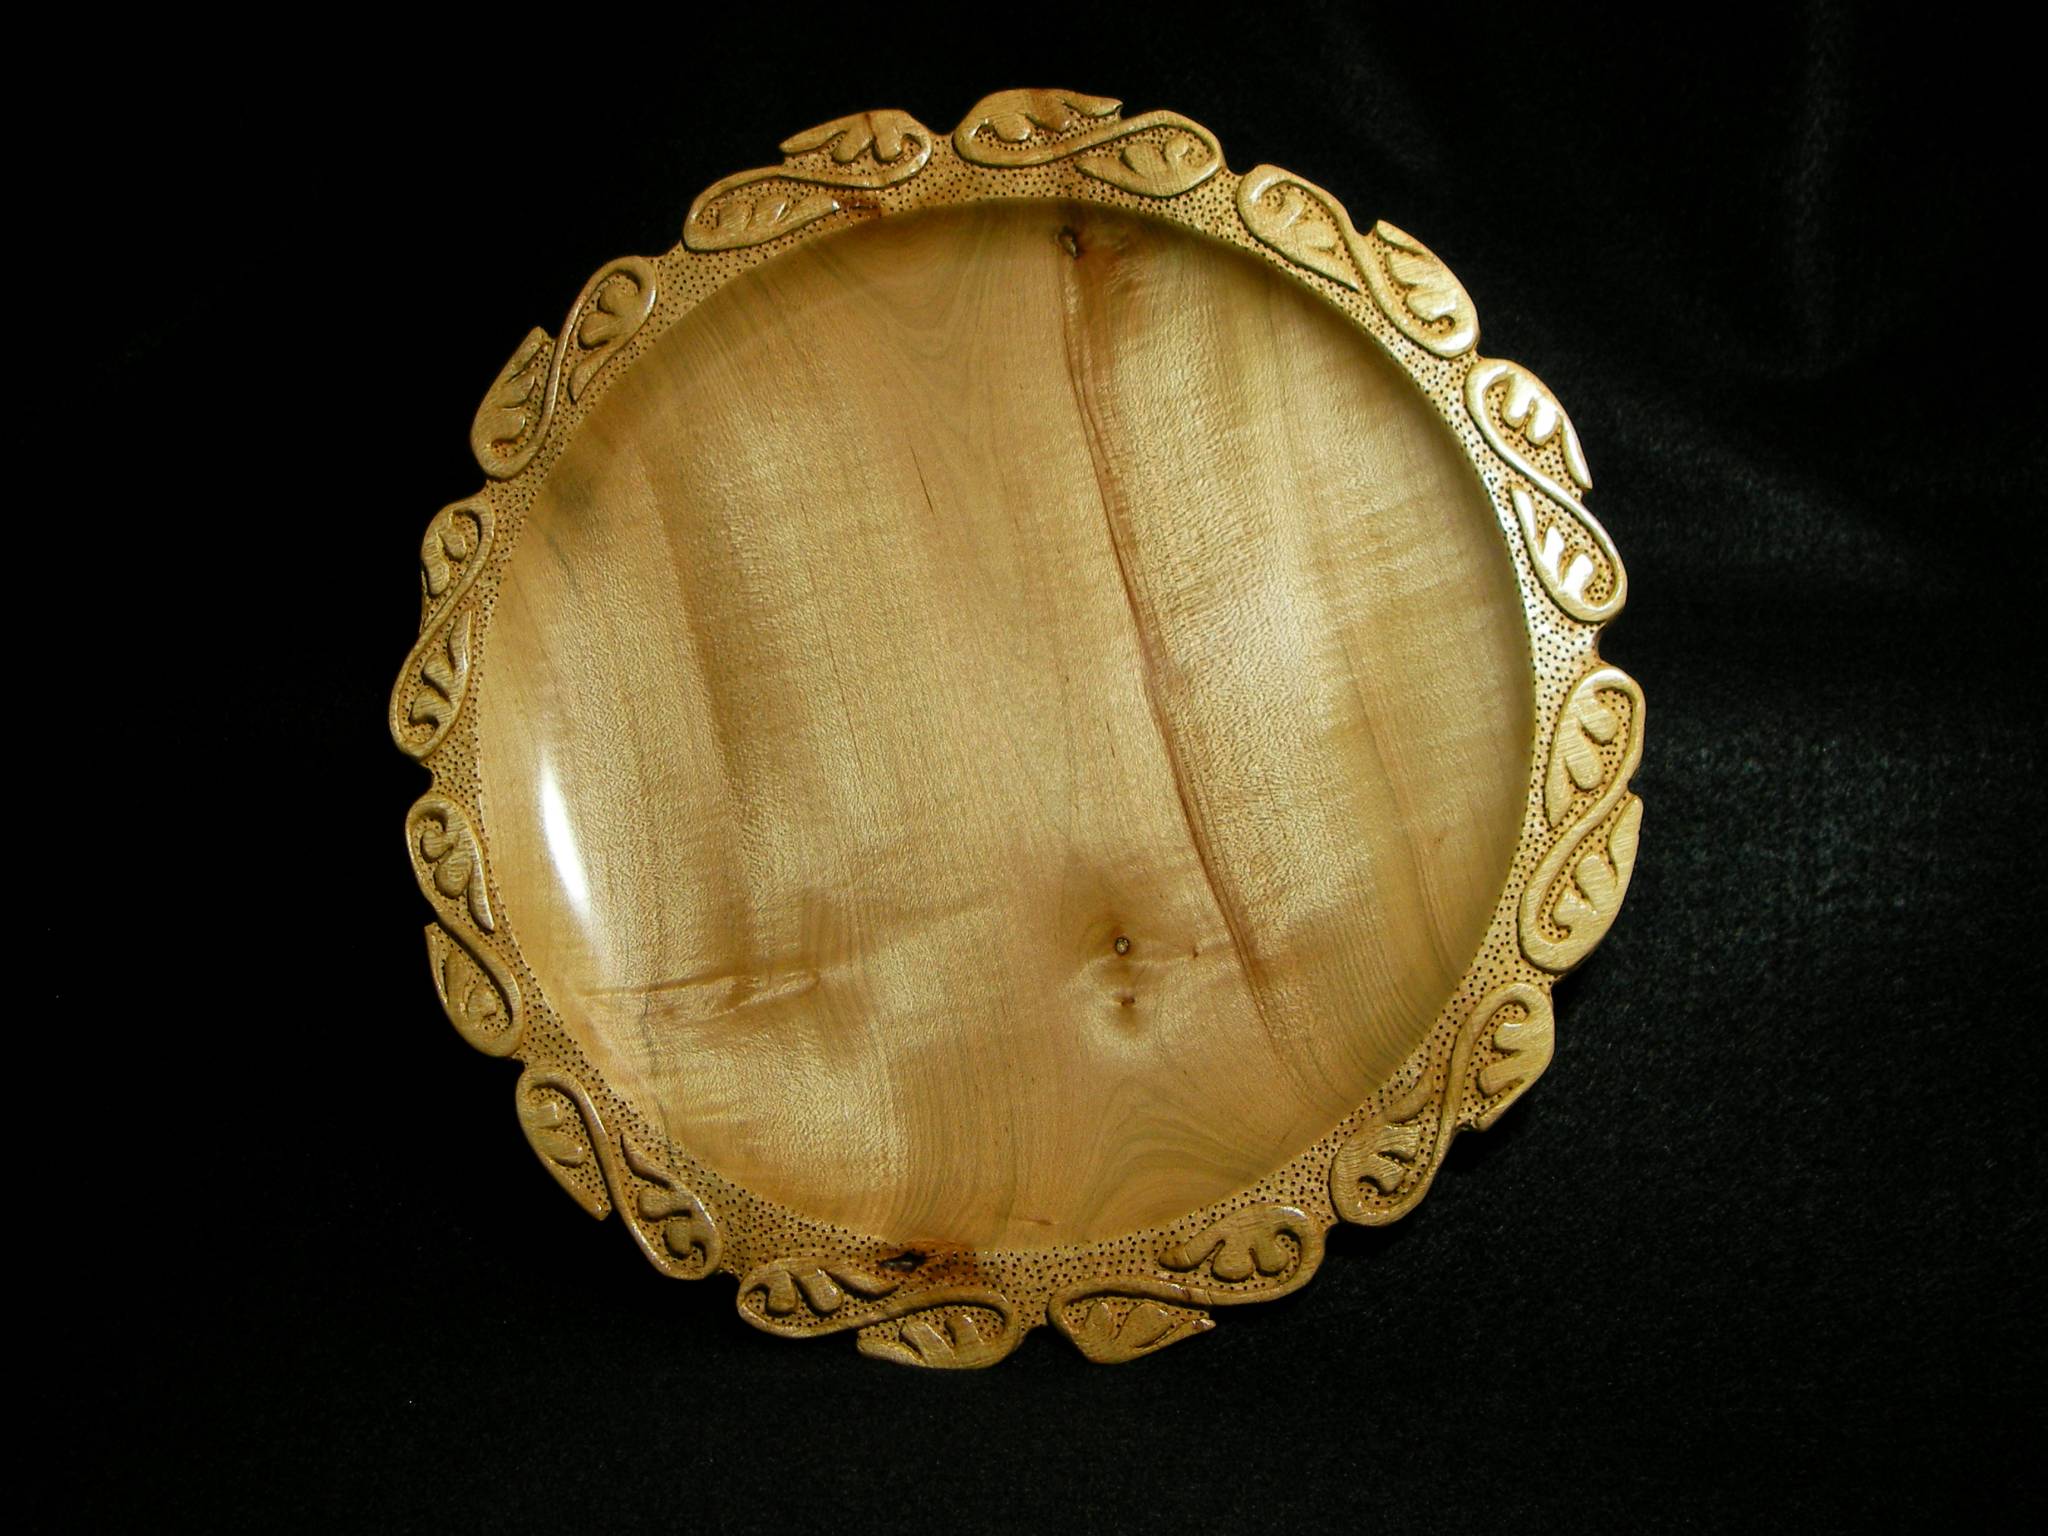 Carved Plate